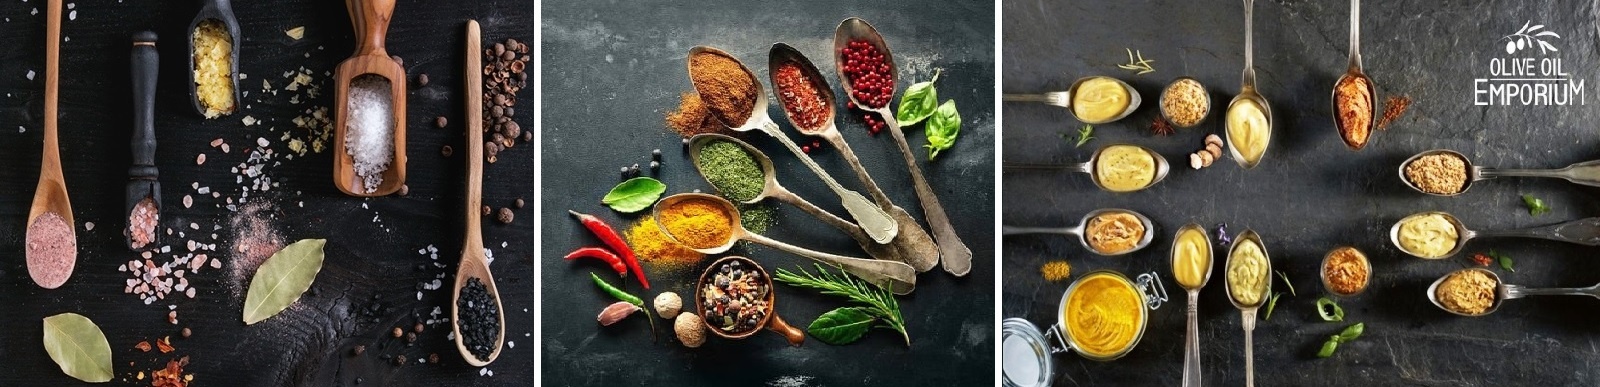 Salts, Spices, Rubs and Mustards - Olive Oil Emporium Toronto